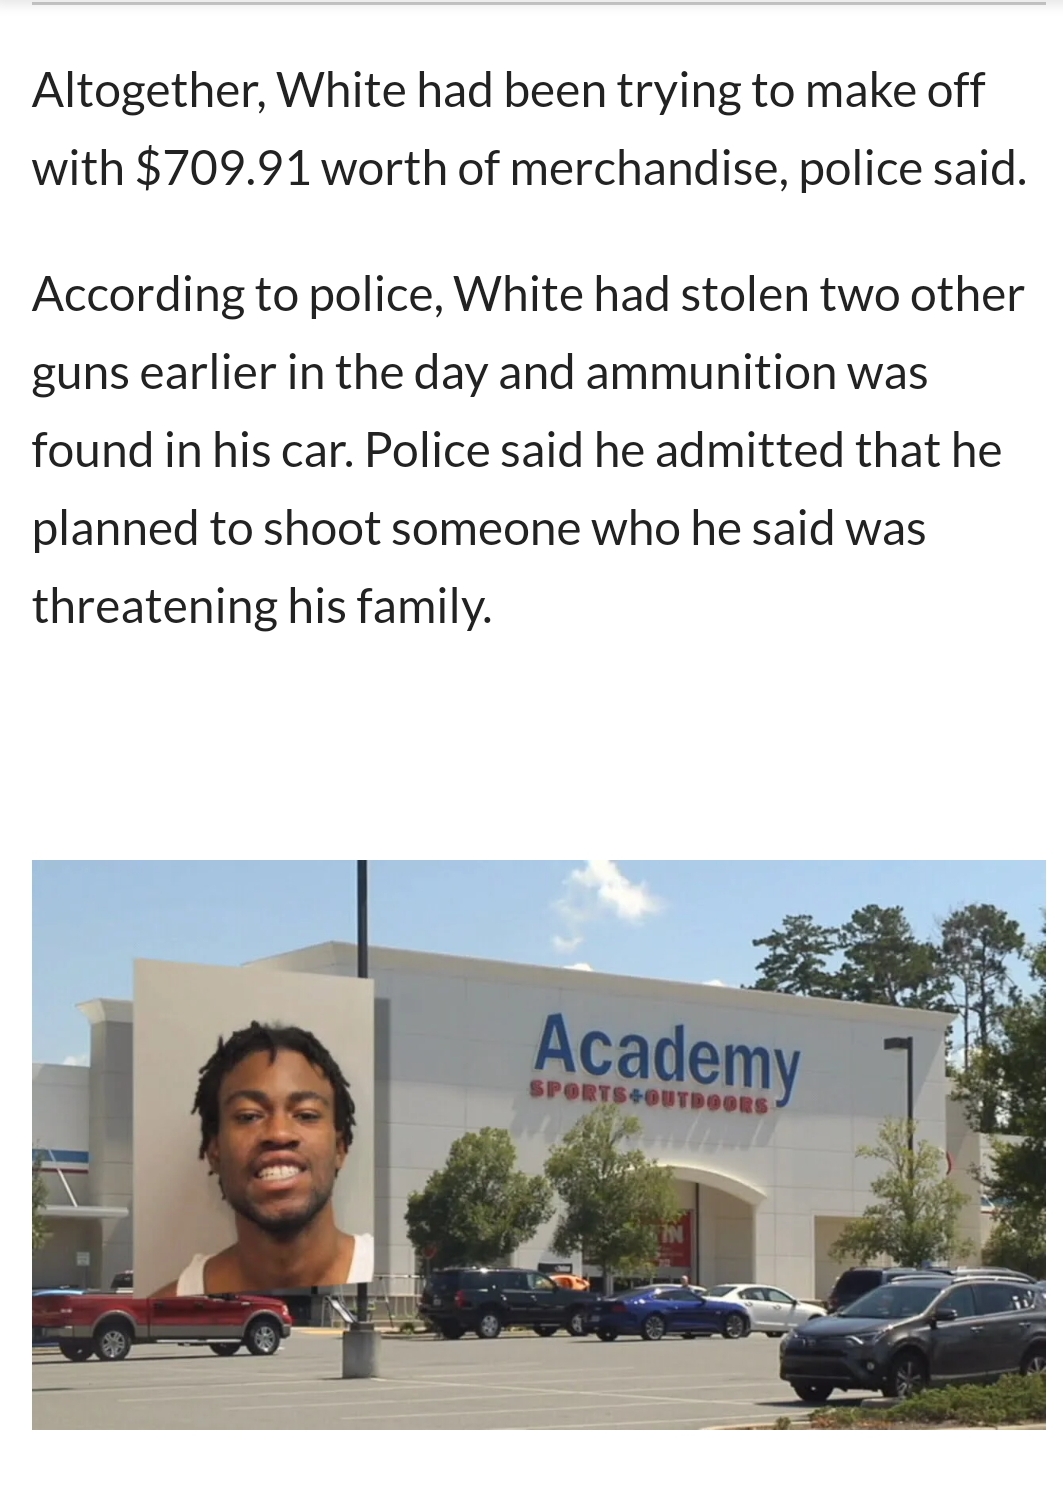 Altogether, White had been trying to make off with $709.91 worth of merchandise, police said. According to police, White had stolen two other guns earlier in the day and ammunition was found in his car. Police said he admitted that he planned to shoot…